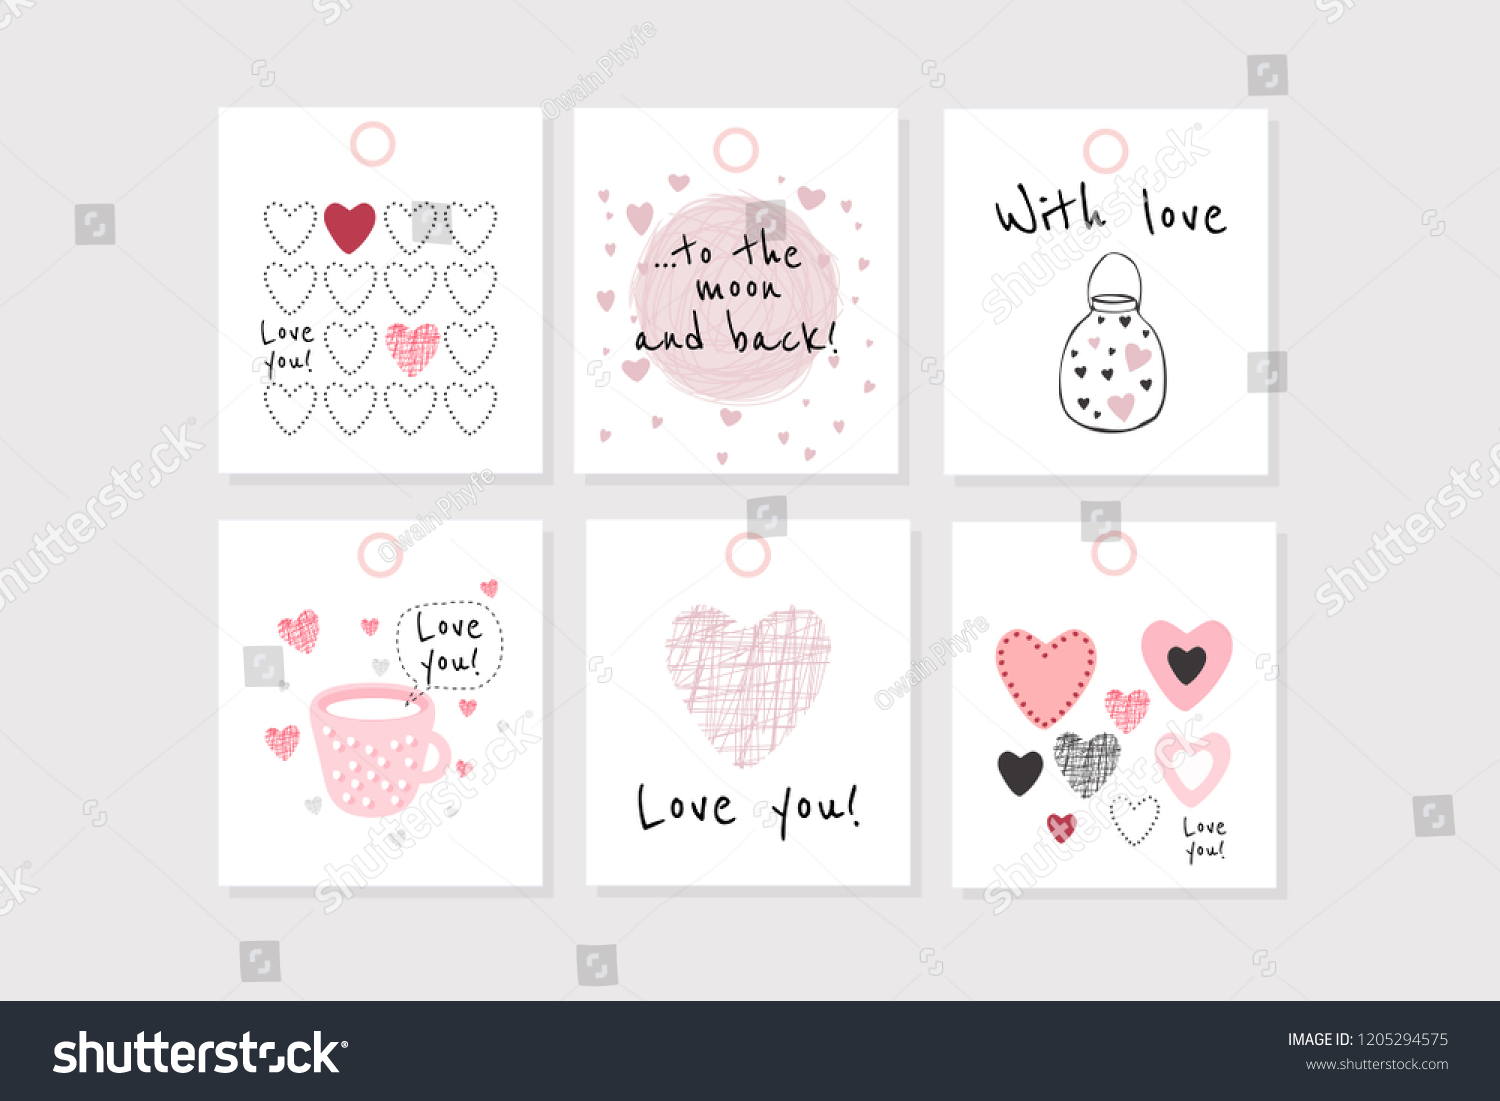 Set of 6 vector Valentine's inspired tags with hearts, simple flat style. Perfect for gift tags, greeting cards, etc. #1205294575